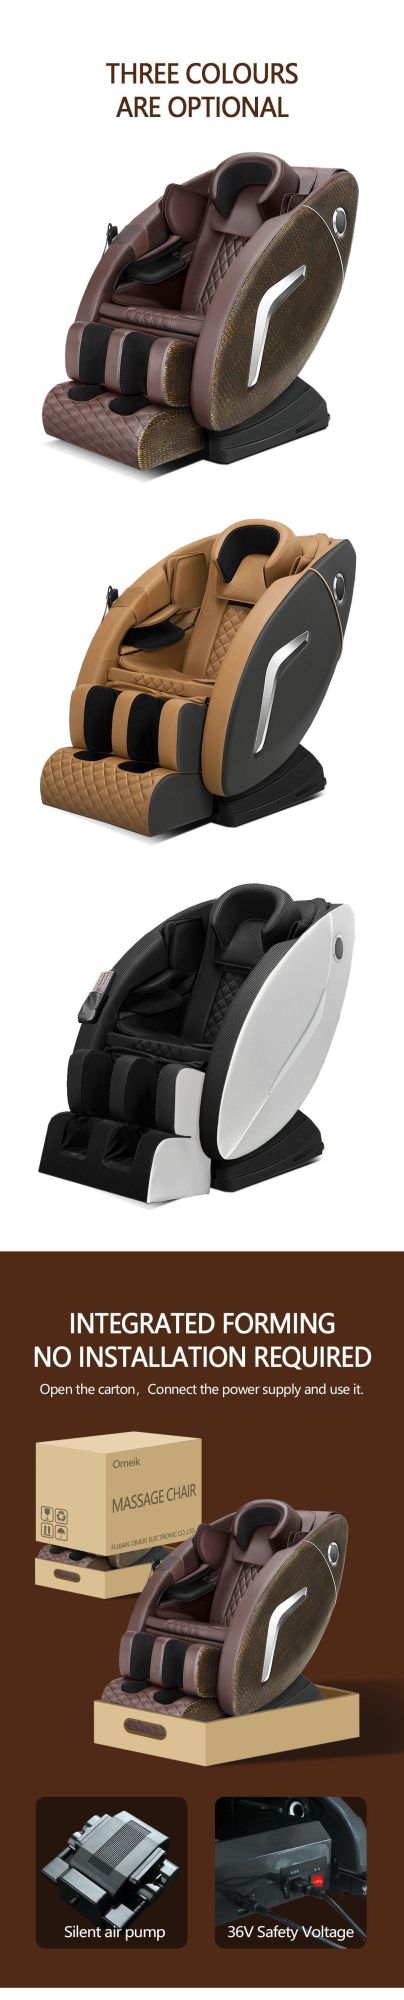 Competitive Good Full Body Kneading Massage Chair with Head Massage and Heating Function